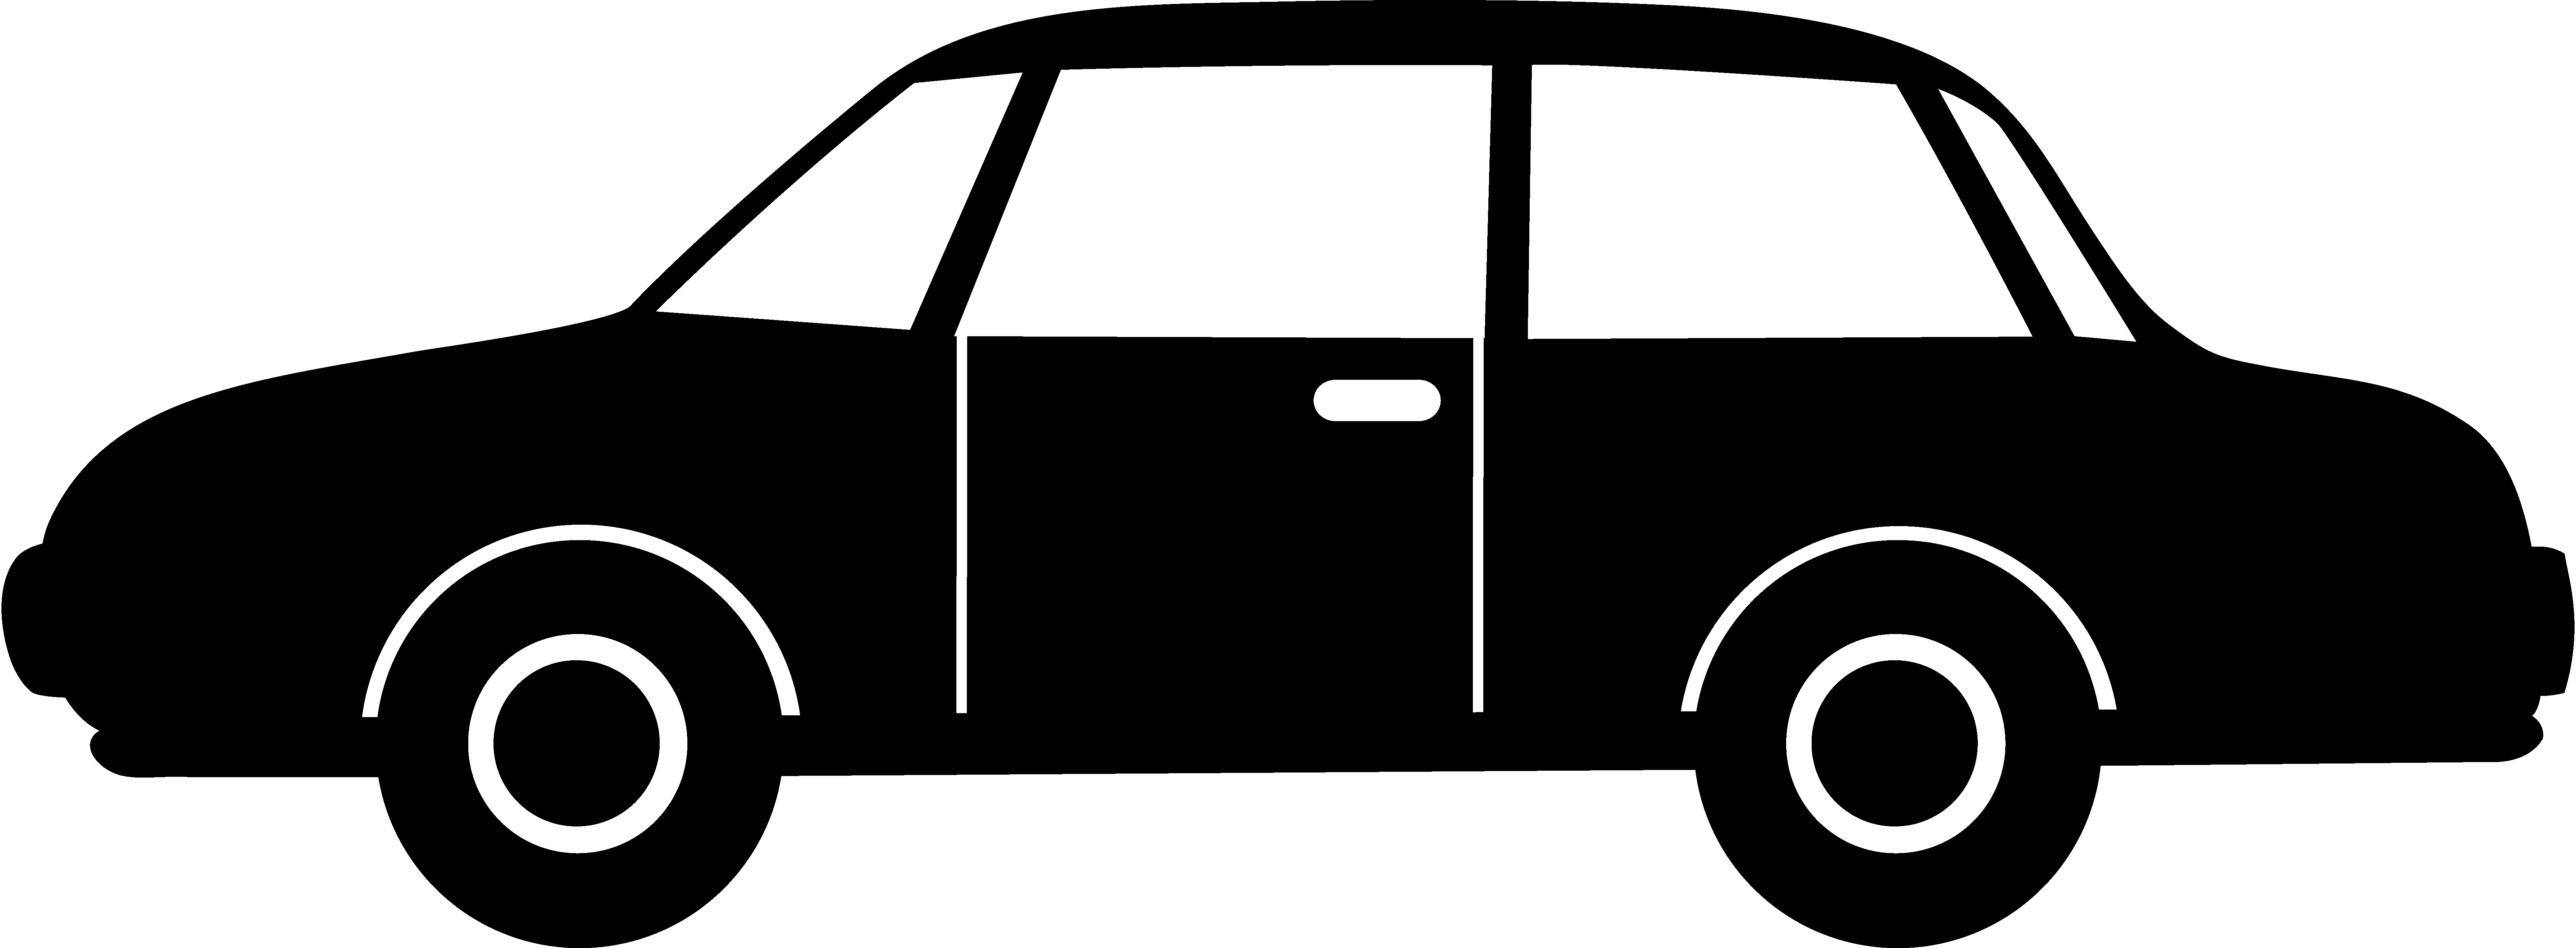 Sports Car Clipart Black And White   Clipart Panda   Free Clipart